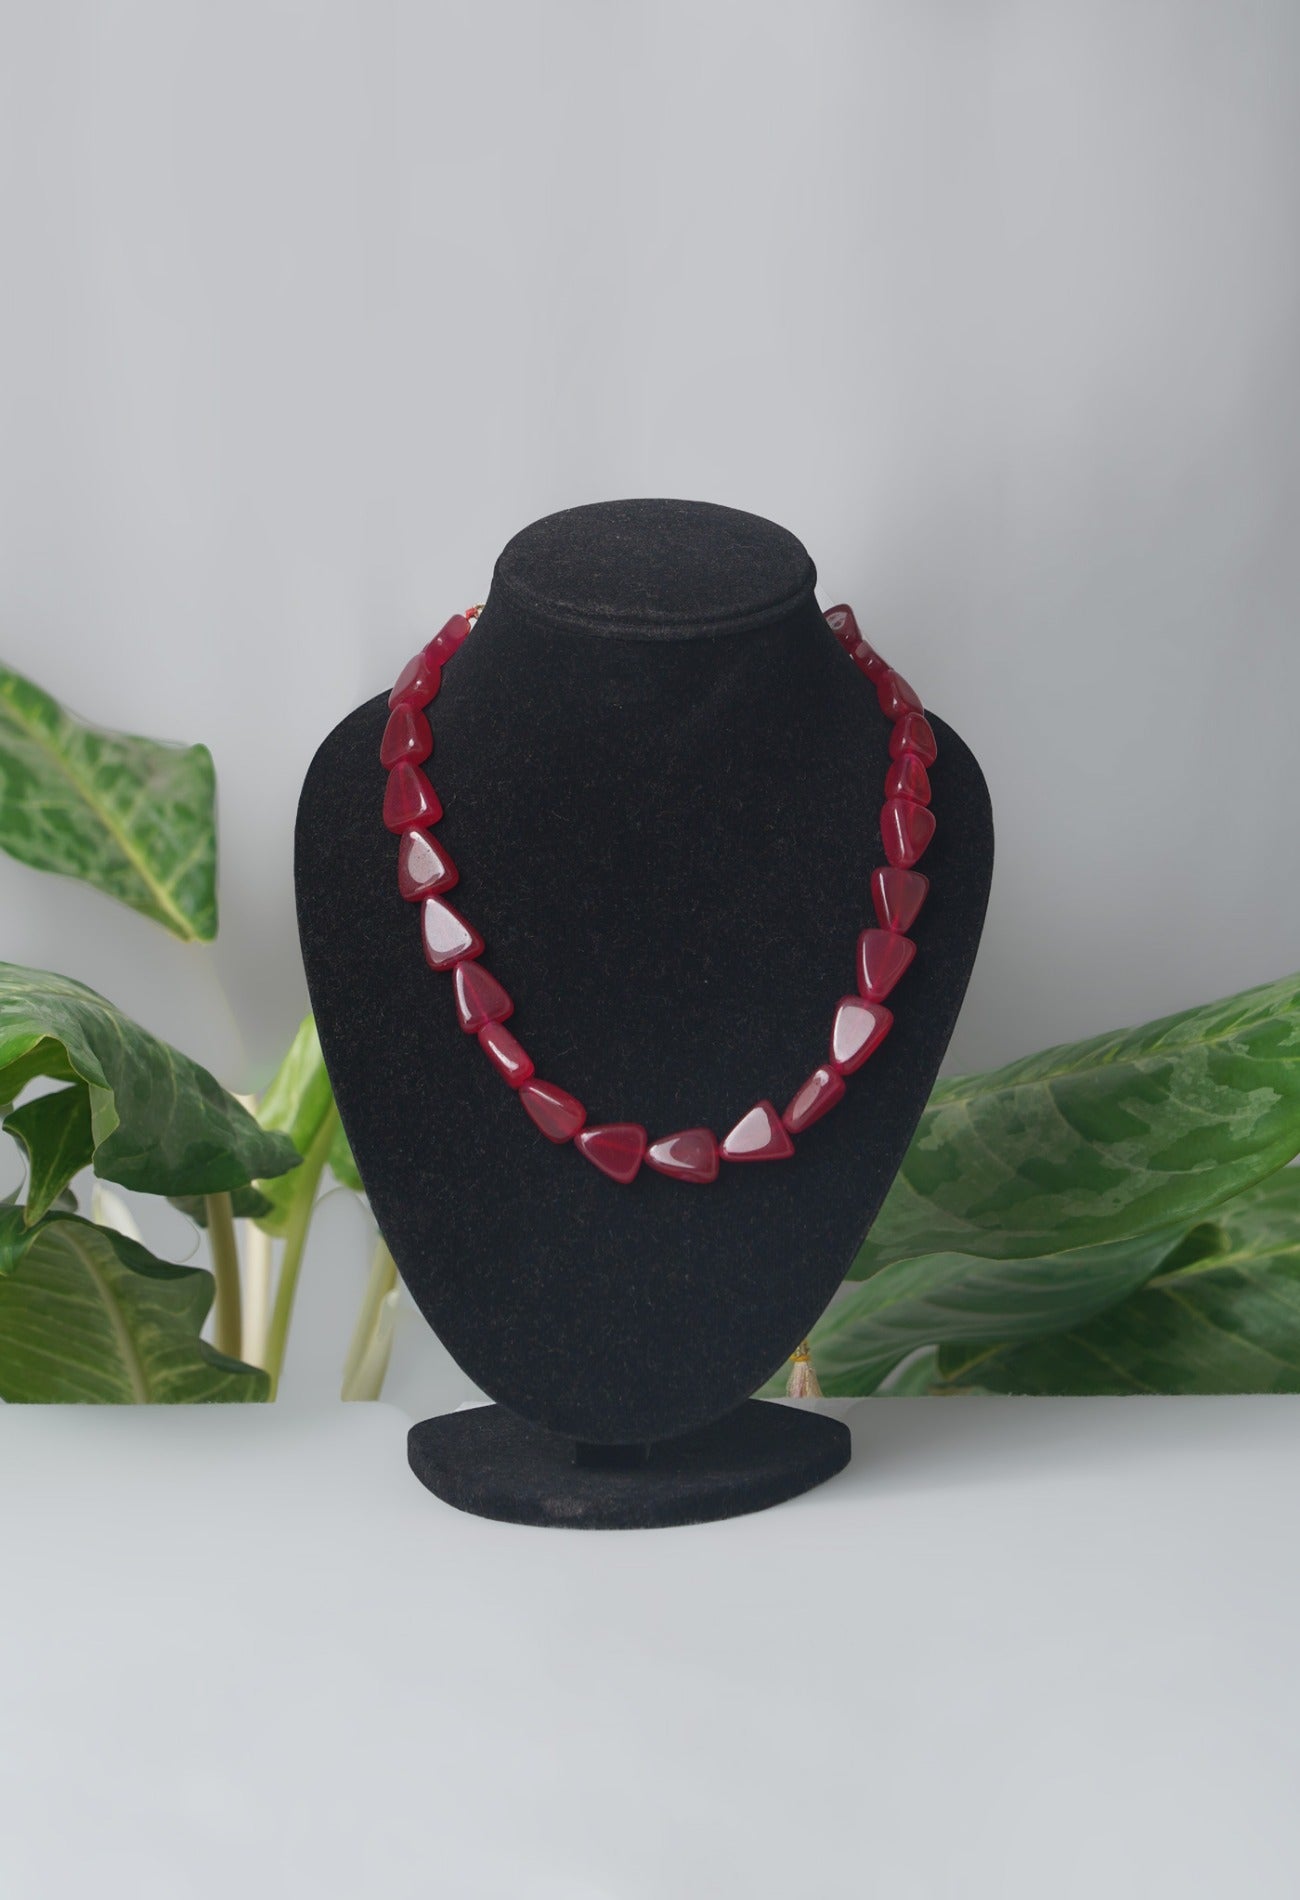 Online Shopping for Red Amravati Ocean Beads Necklace with Thread with Jewellery from Andhra Pradesh at Unnatisilks.com India
